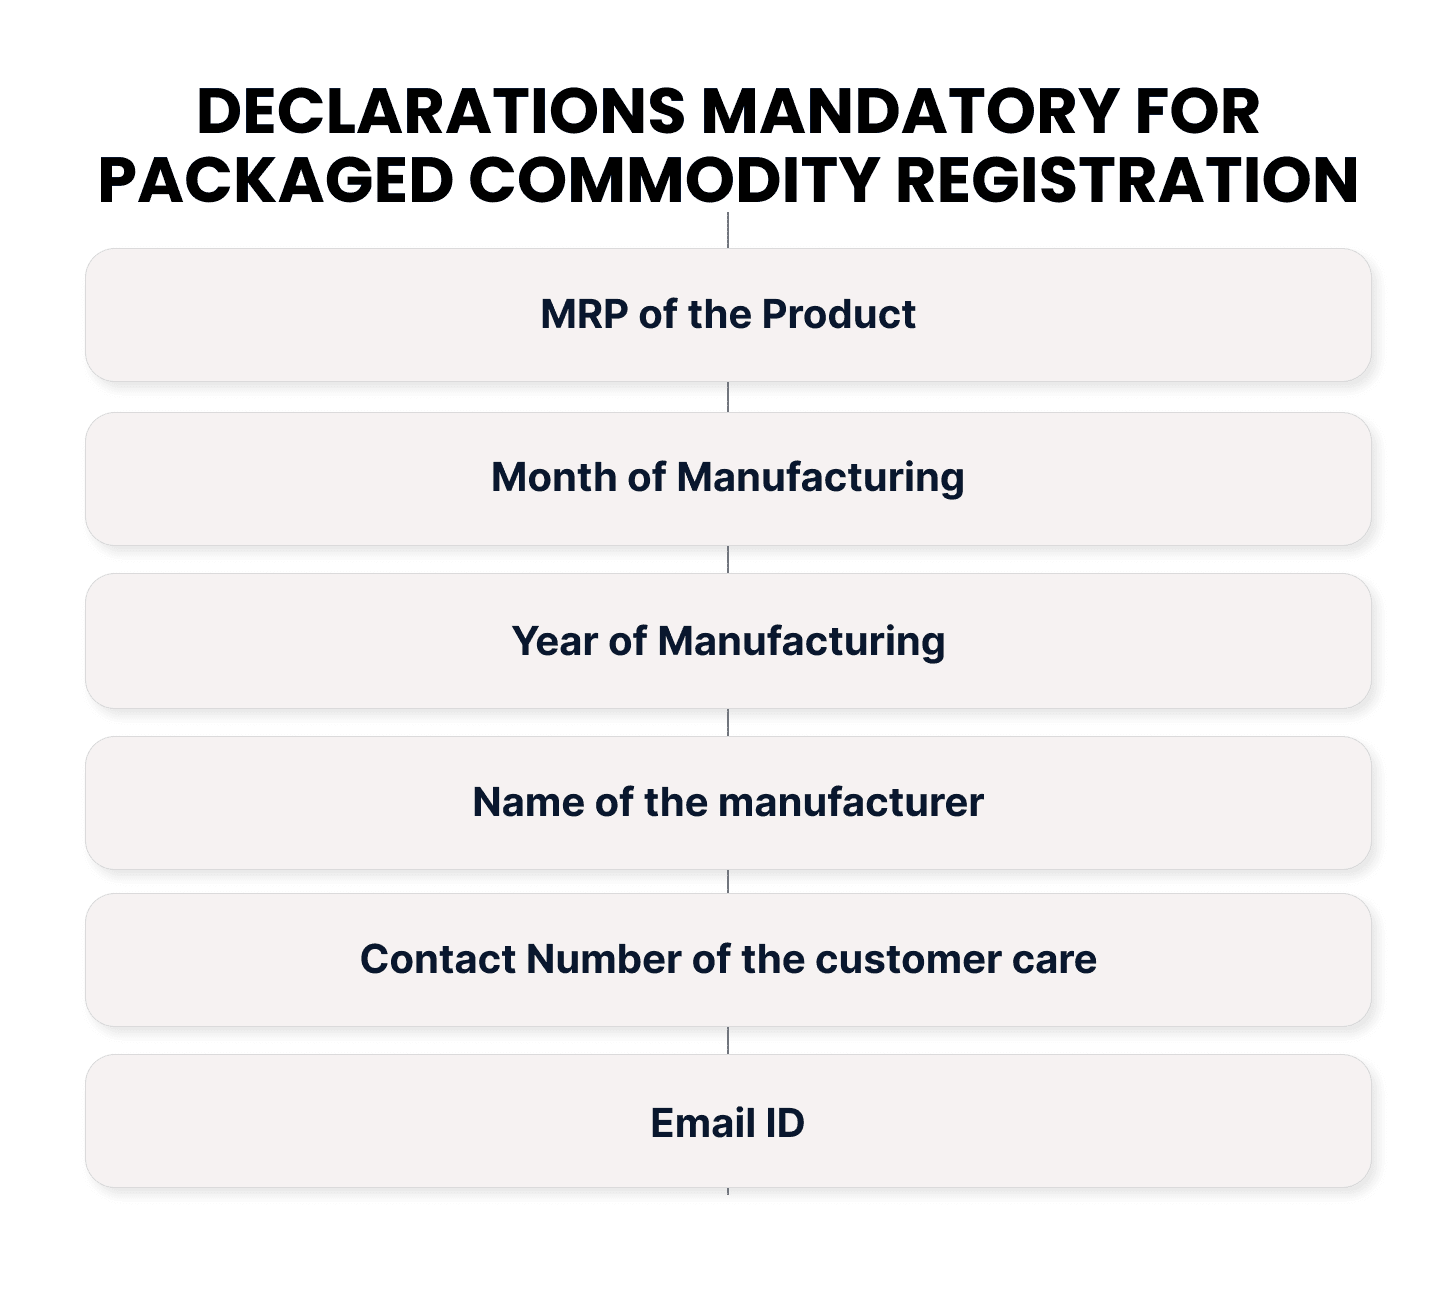 Declarations mandatory for Packaged Commodity registration